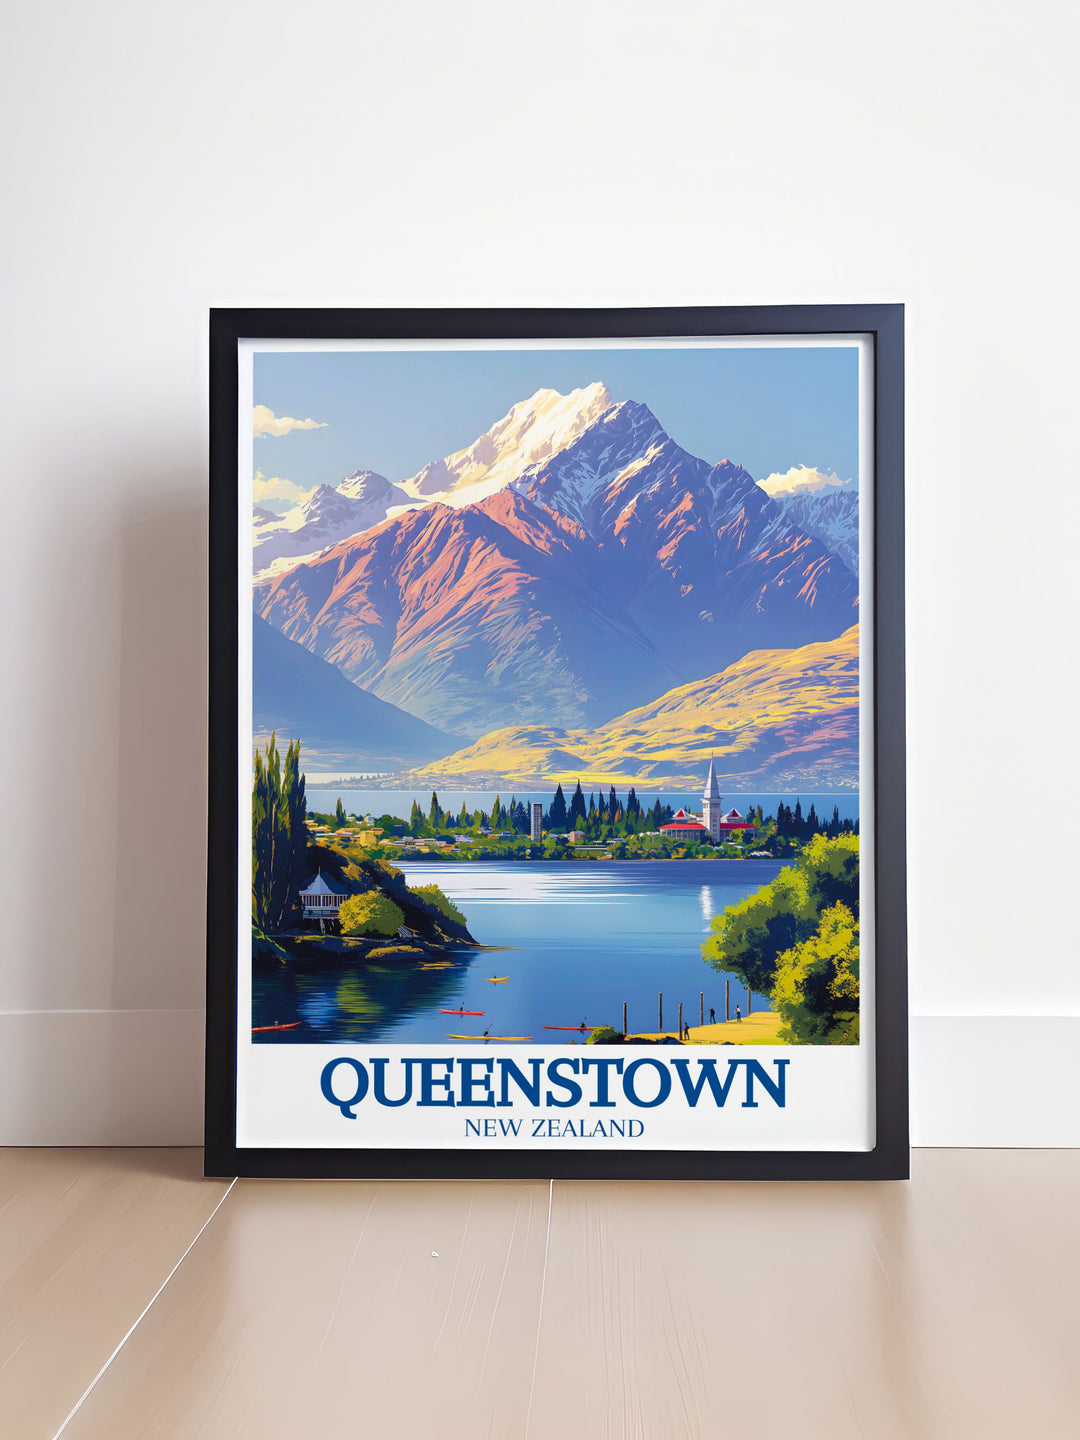 Queenstown travel poster highlighting The Remarkables Lake Wakatipu in a vintage style perfect for home decor office spaces and gifts showcasing the natural beauty and charm of Queenstown through a timeless black and white fine line print